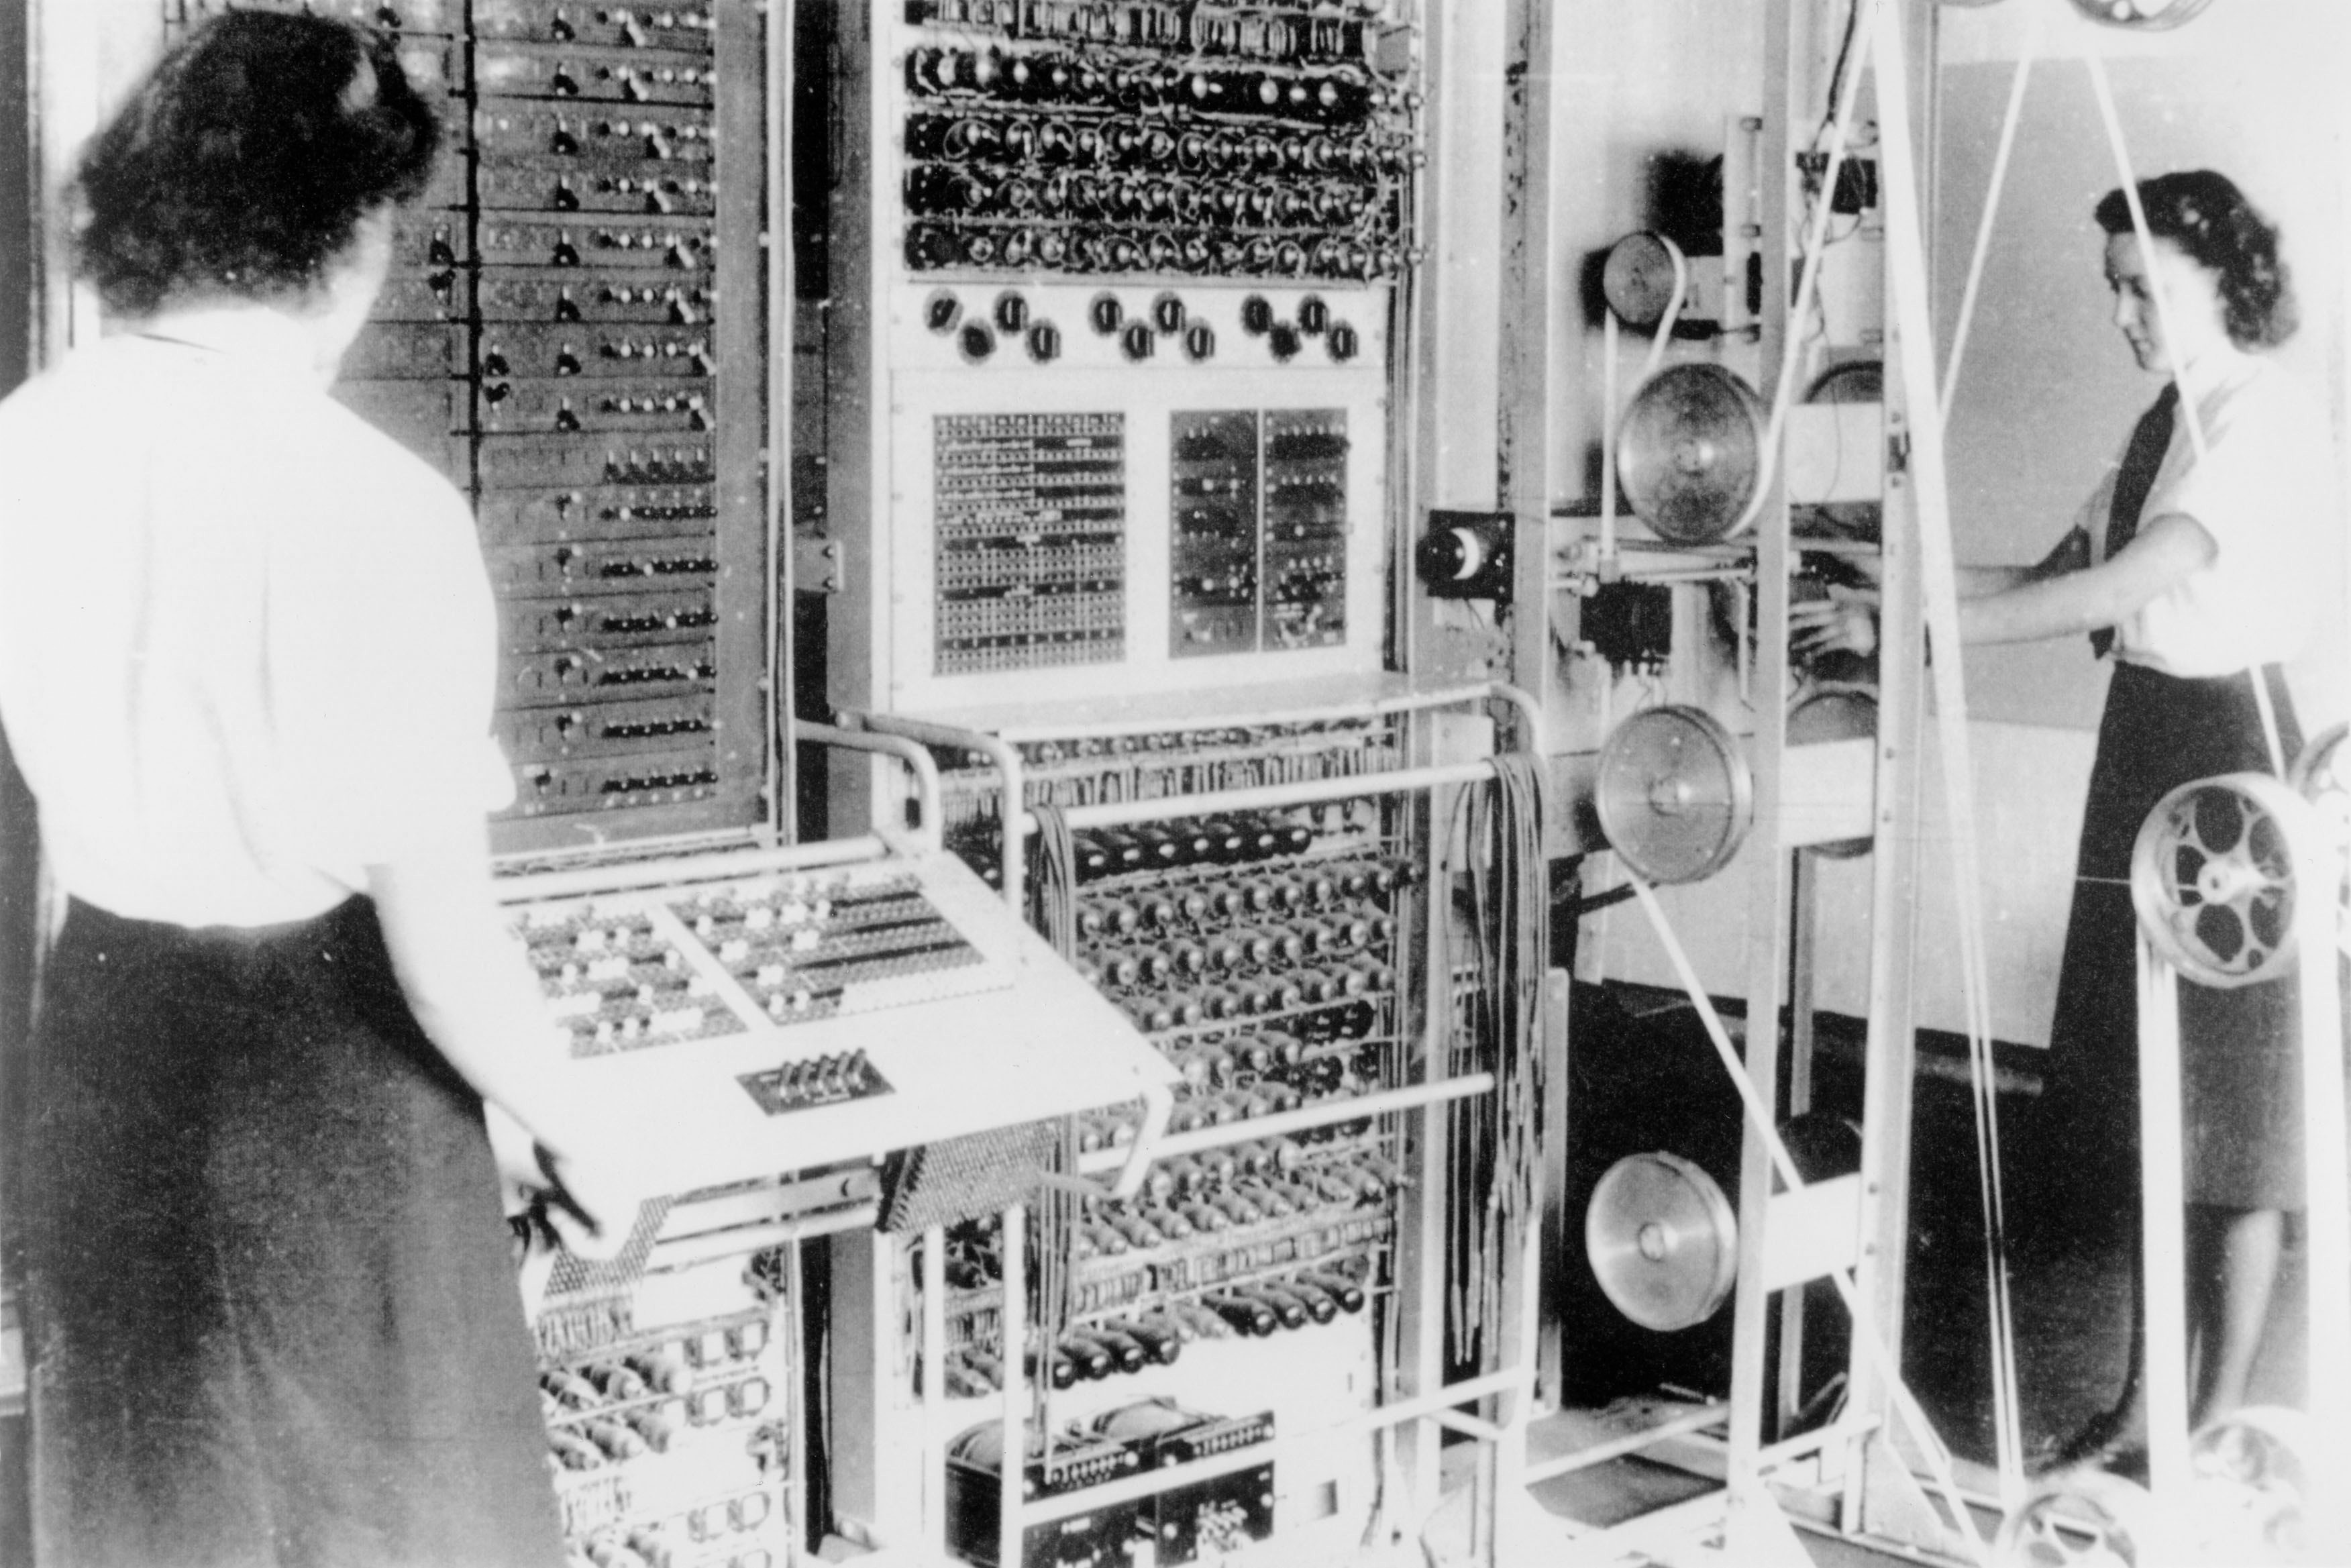 Colossus code breaking computer, Bletchley Park, Buckinghamshire, England, United Kingdom, 1943